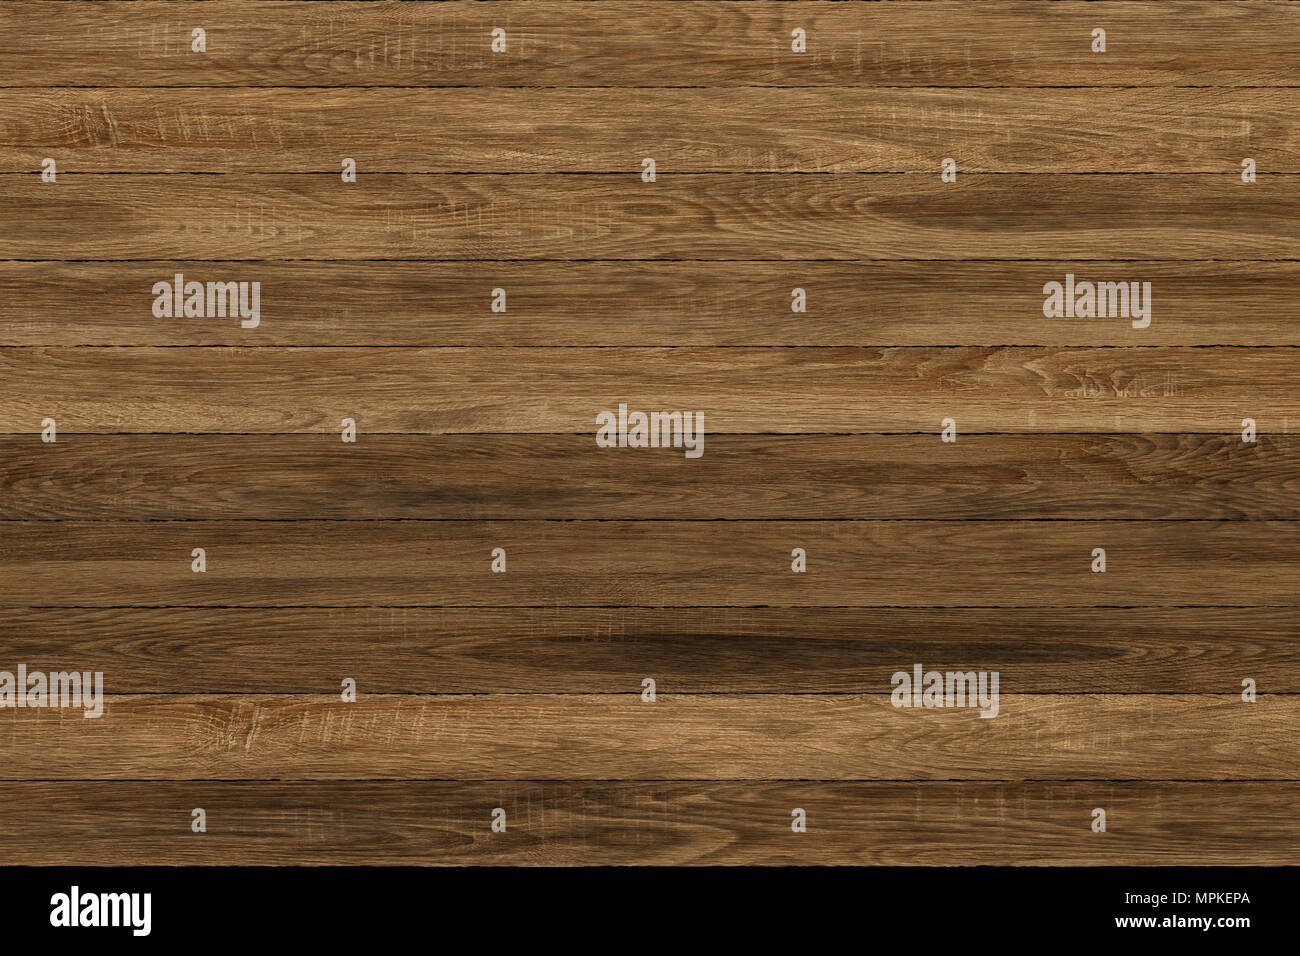 Grunge wood panels. Planks Background. Old wall wooden vintage floor Stock Photo